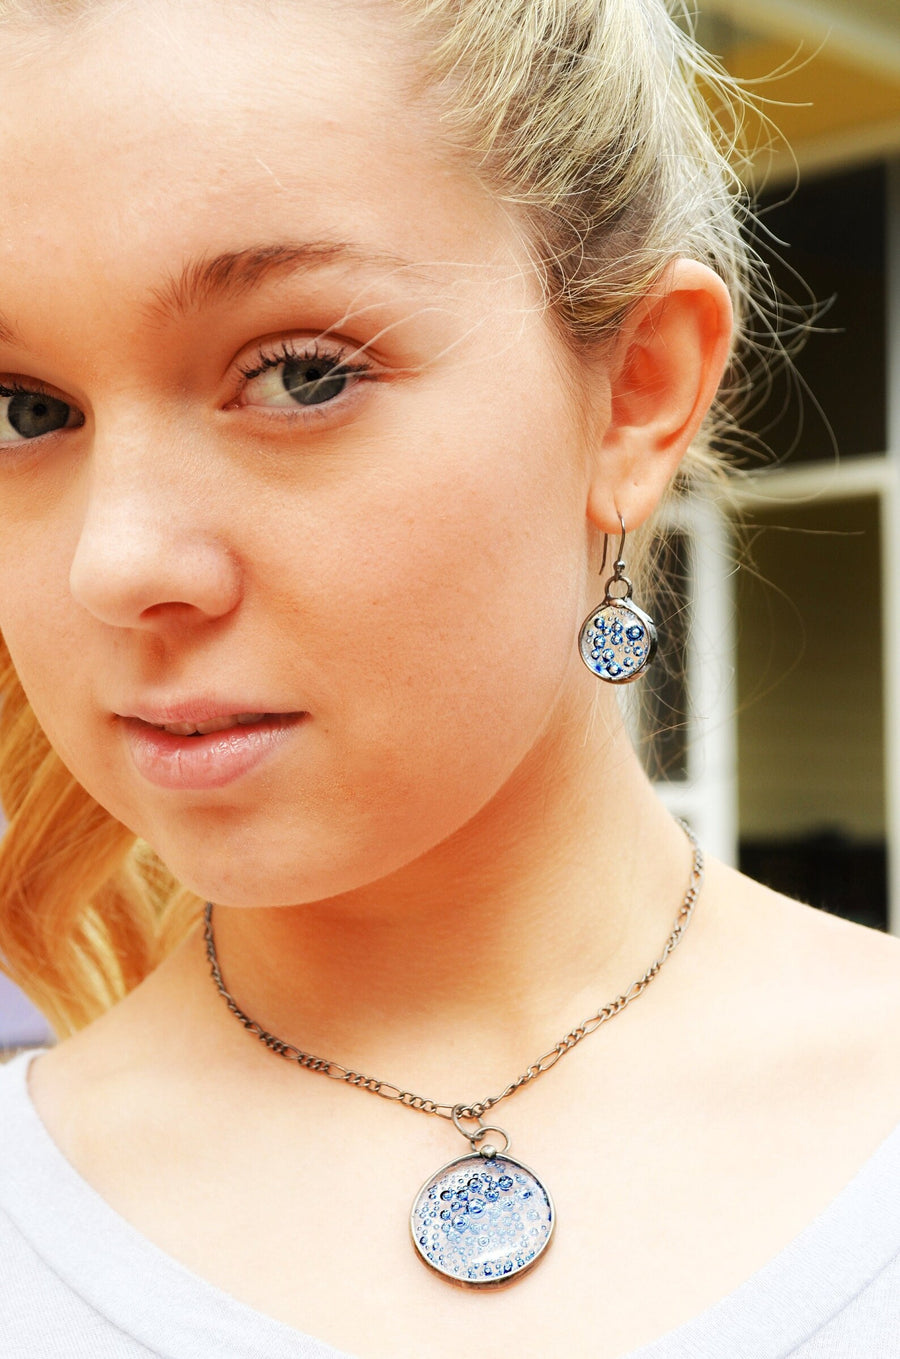 Model wearing Blue Bubble Dangle earrings with hand formed sterling silver ear wires and Blue Bubble Dot Fused Glass Matching Necklace Pendant.